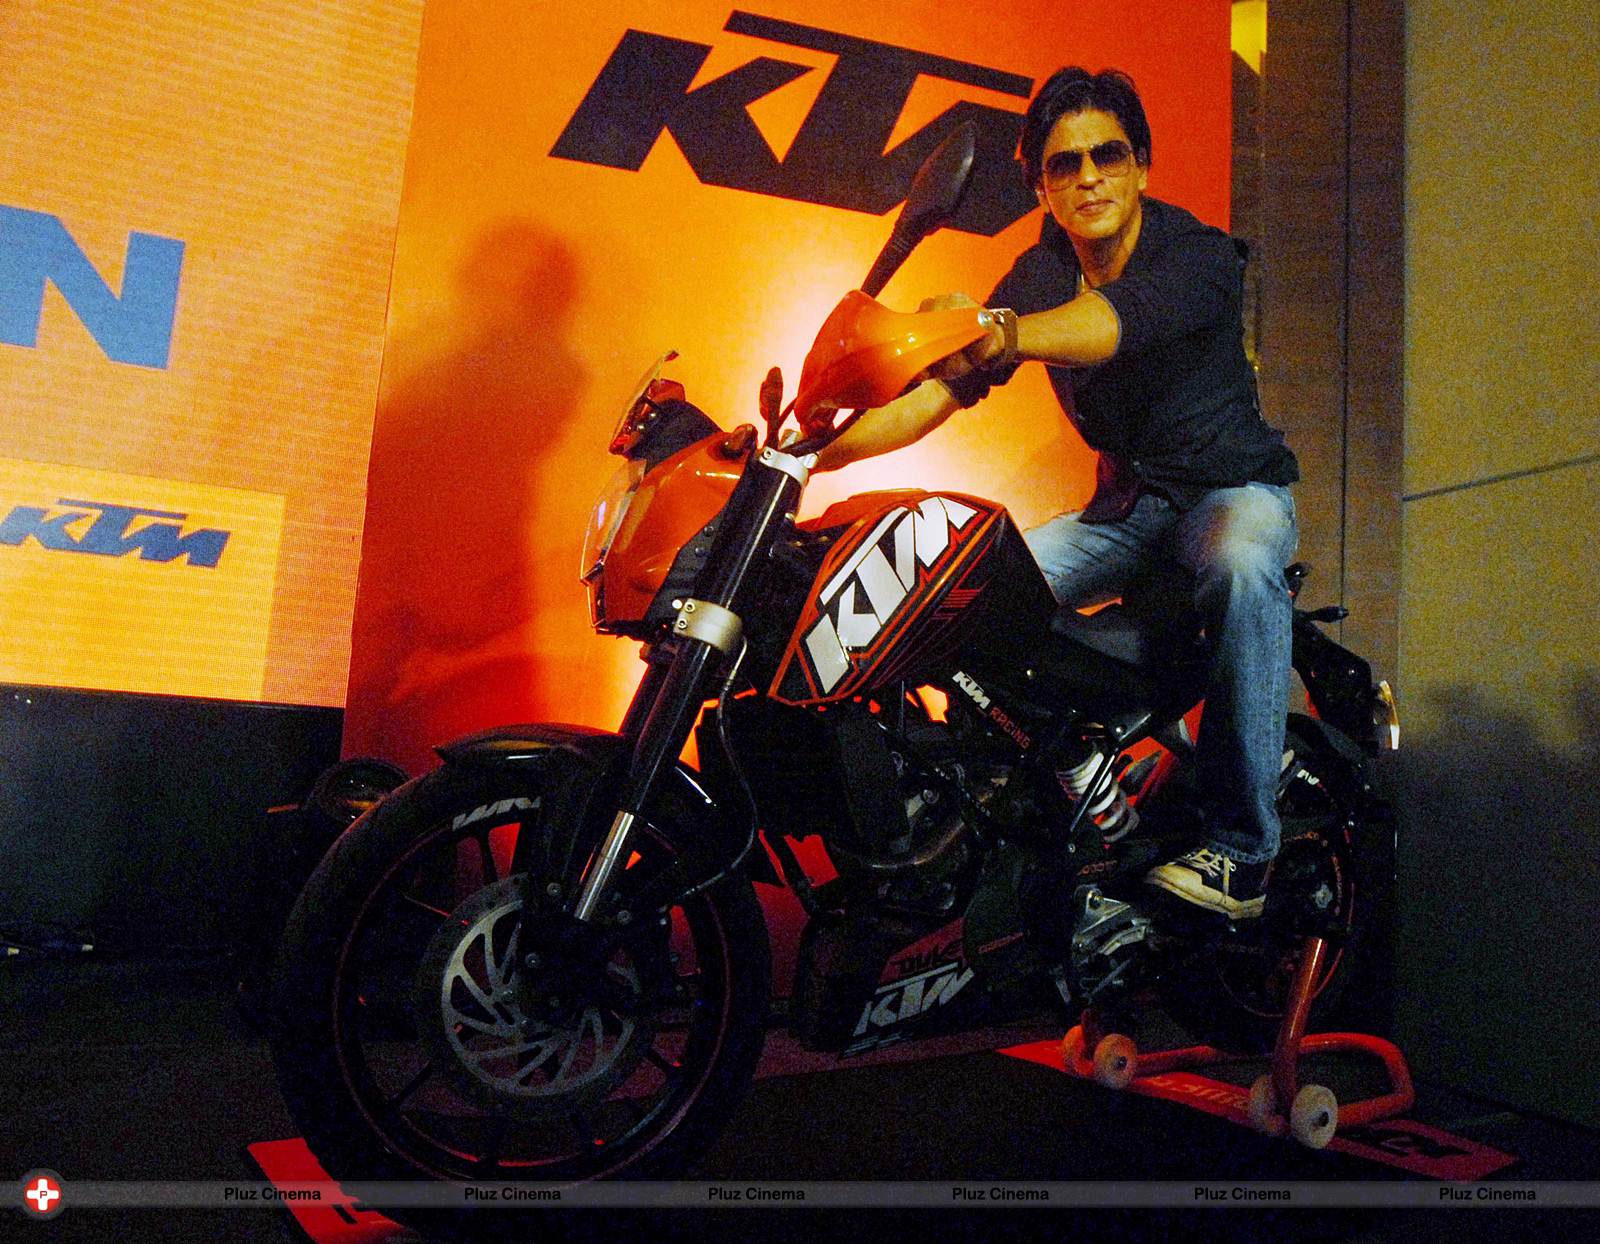 Shah Rukh Khan at KTM Press Conference in Pune Photos | Picture 539732